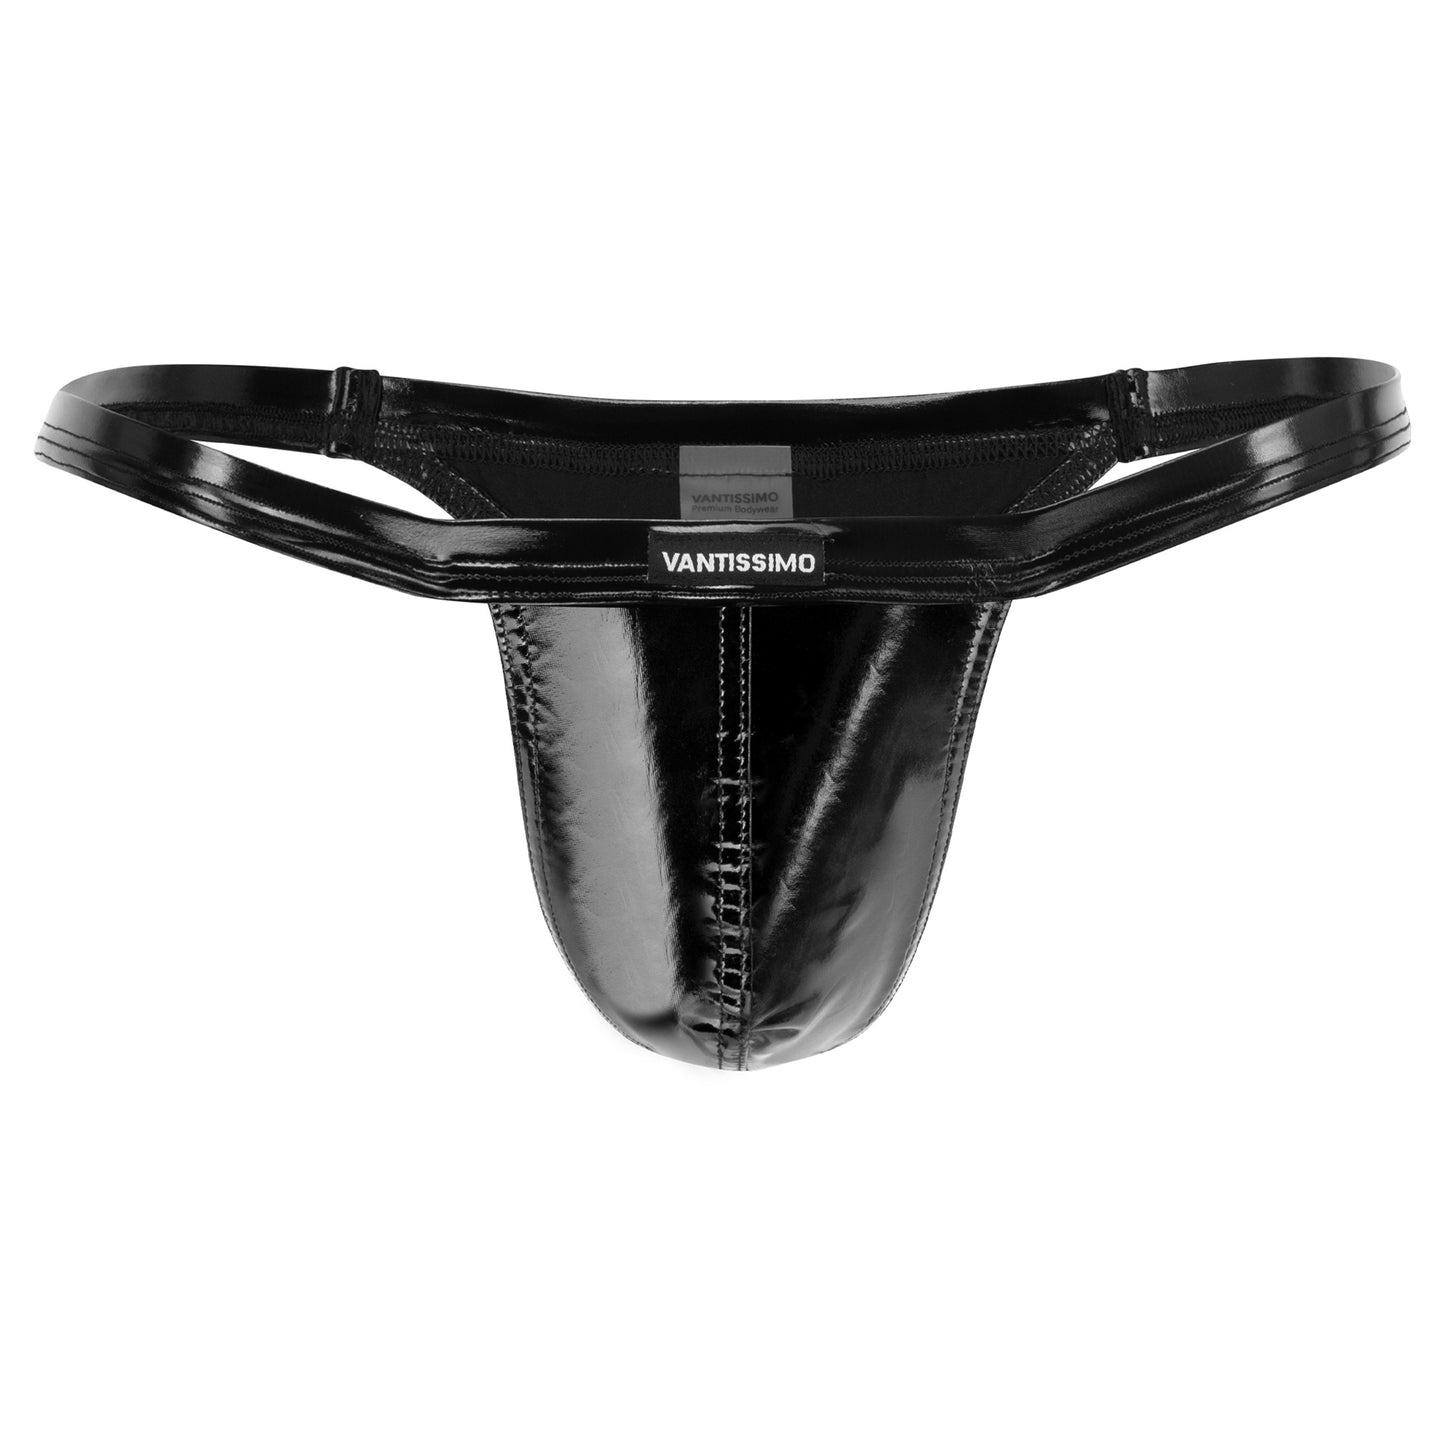 MEN'S G-STRING BLACK HIGH GLOSS LACQUER LATEX LEATHER LOOK